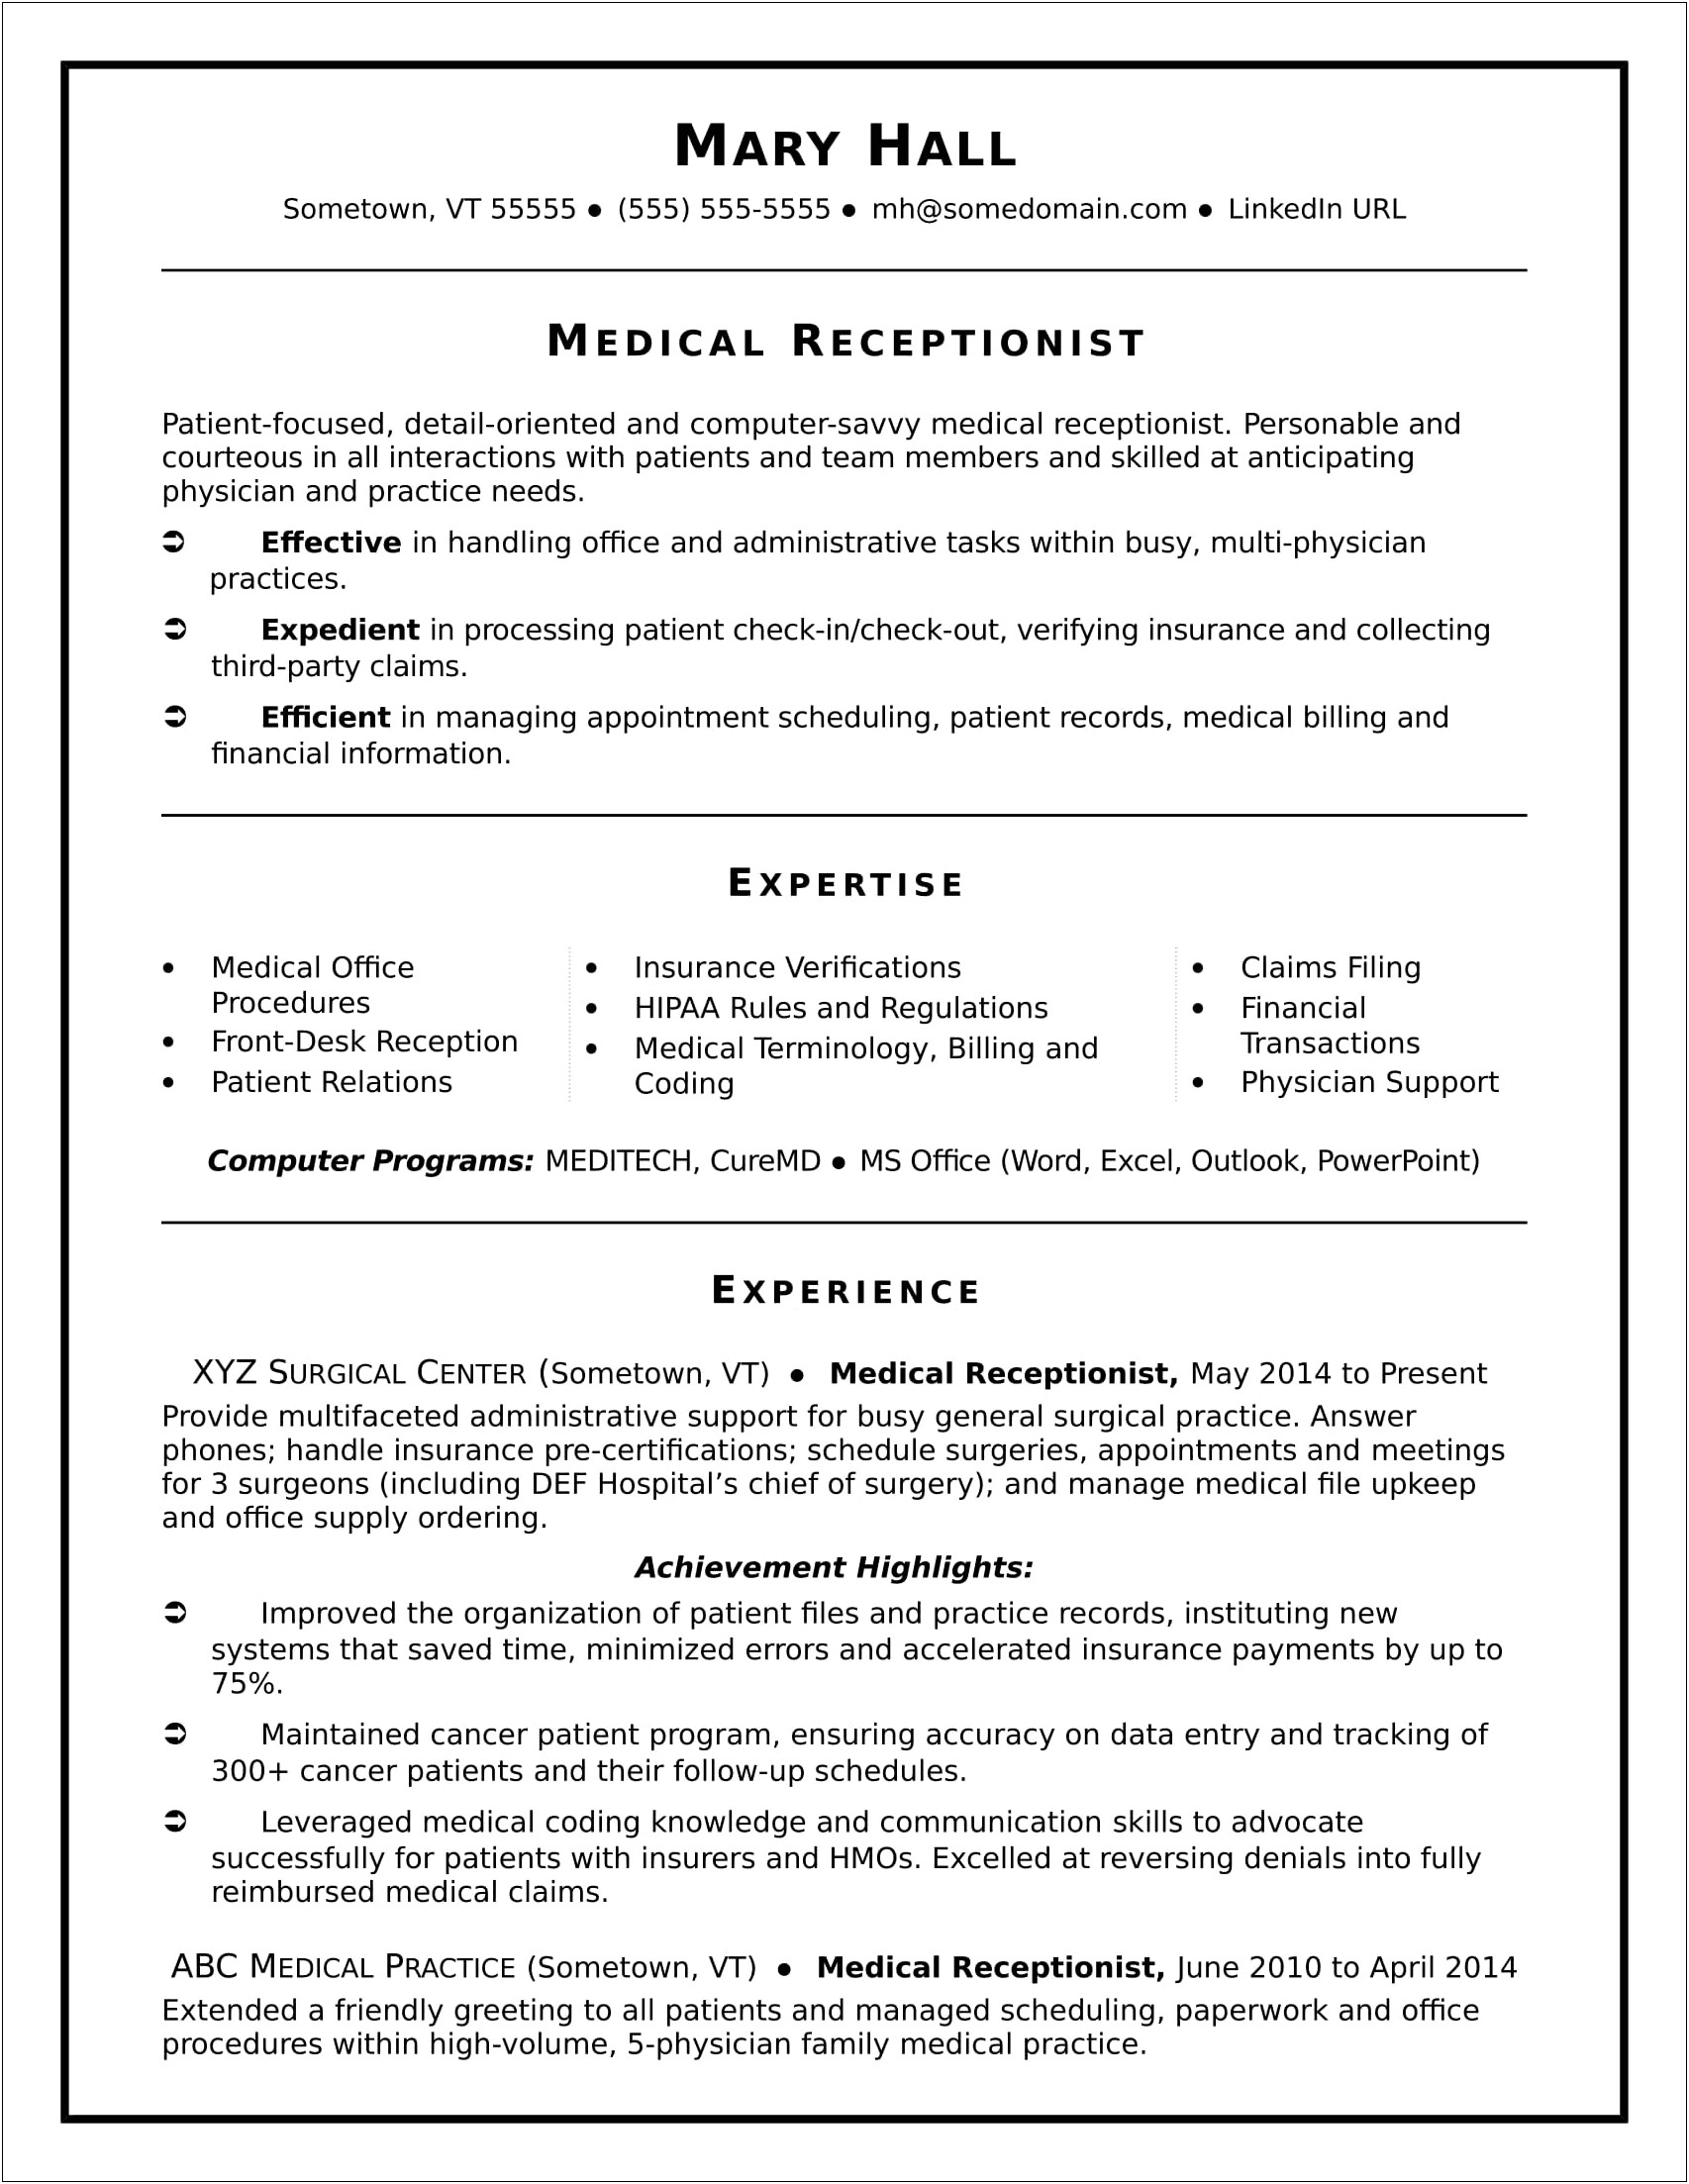 Resume Objective Examples For Healthcare Professional